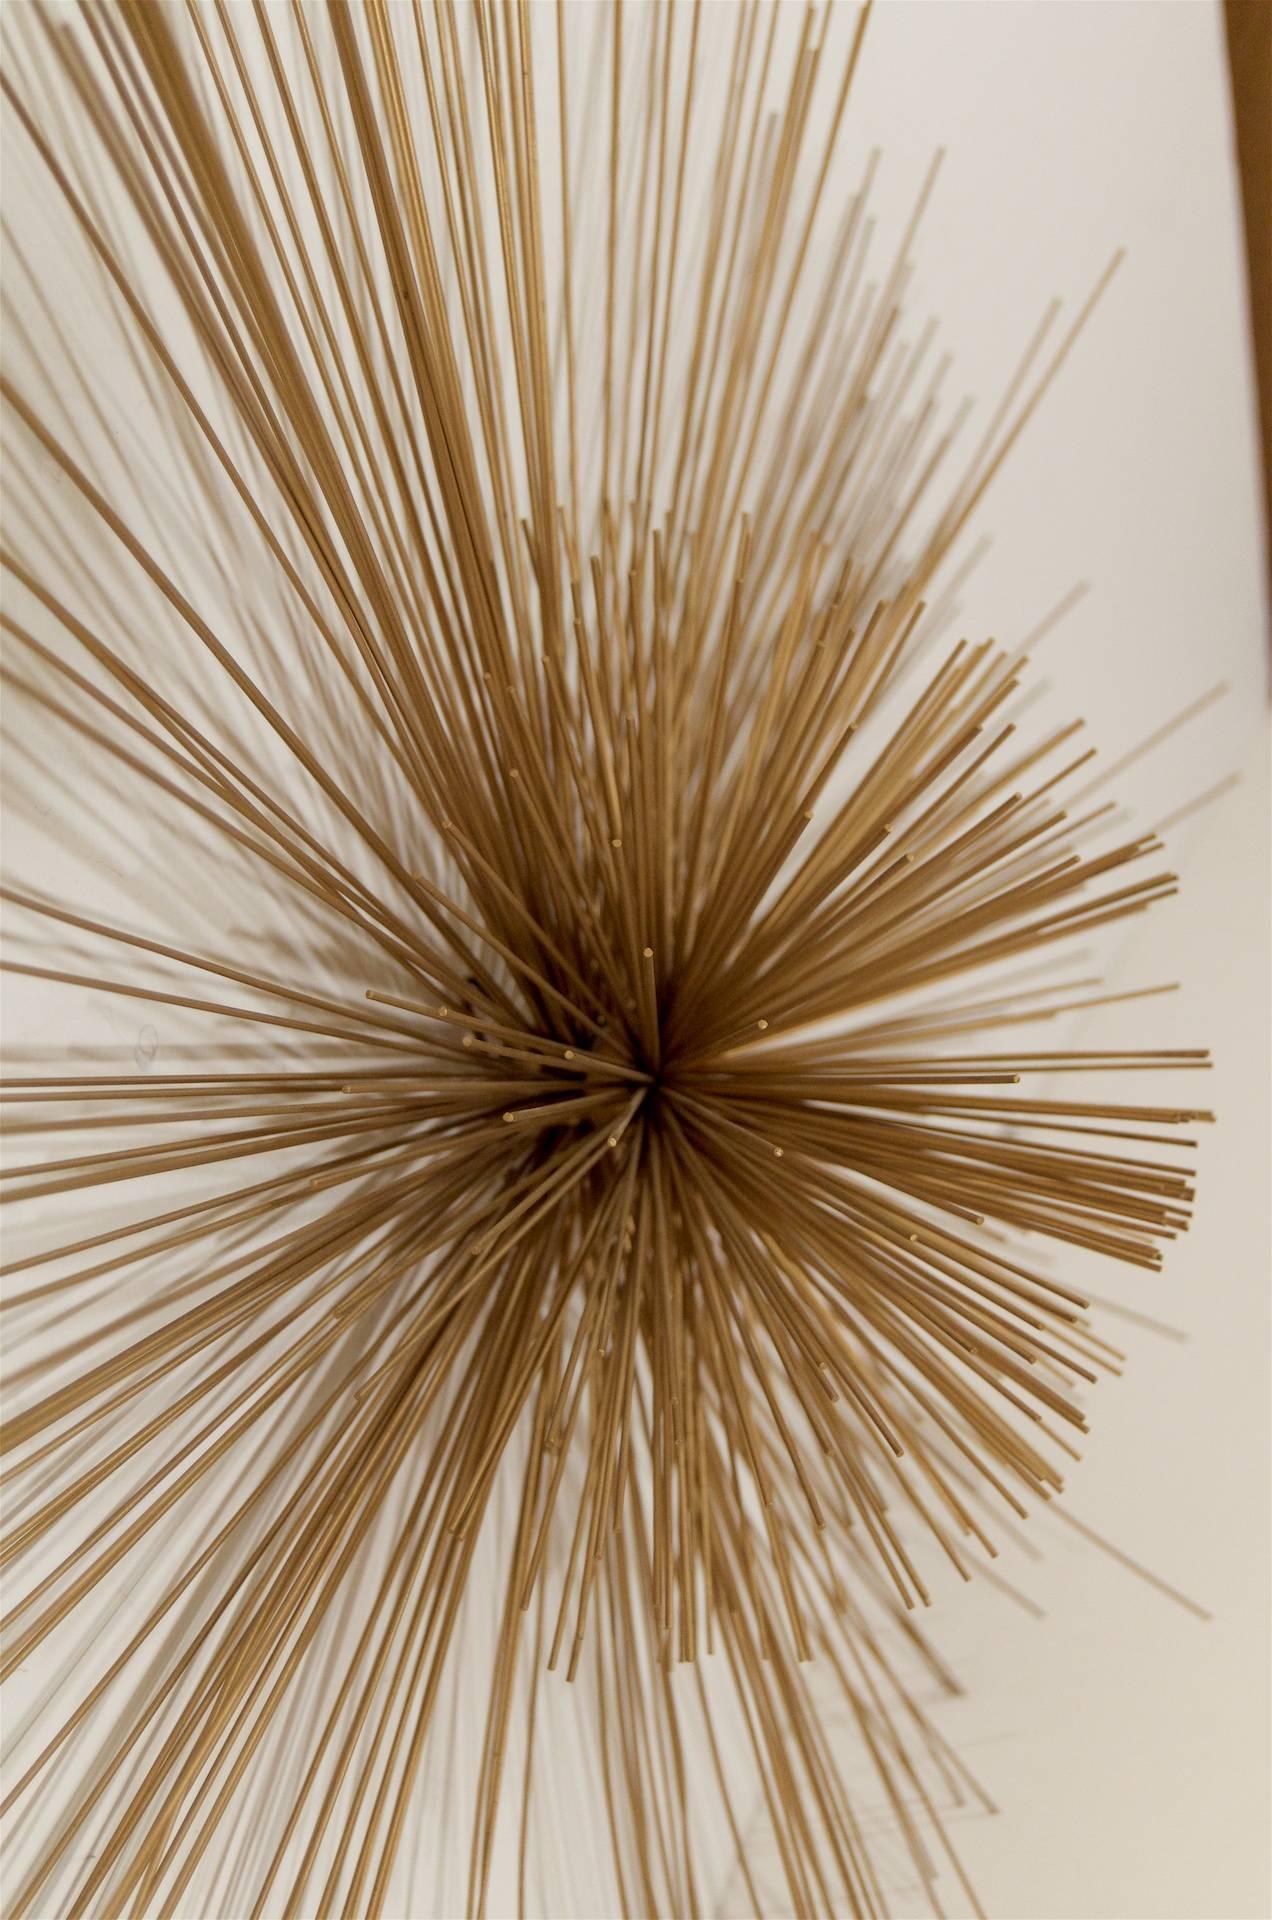 Late 20th Century Urchin Wall Hanging in the Style of Curtis Jere